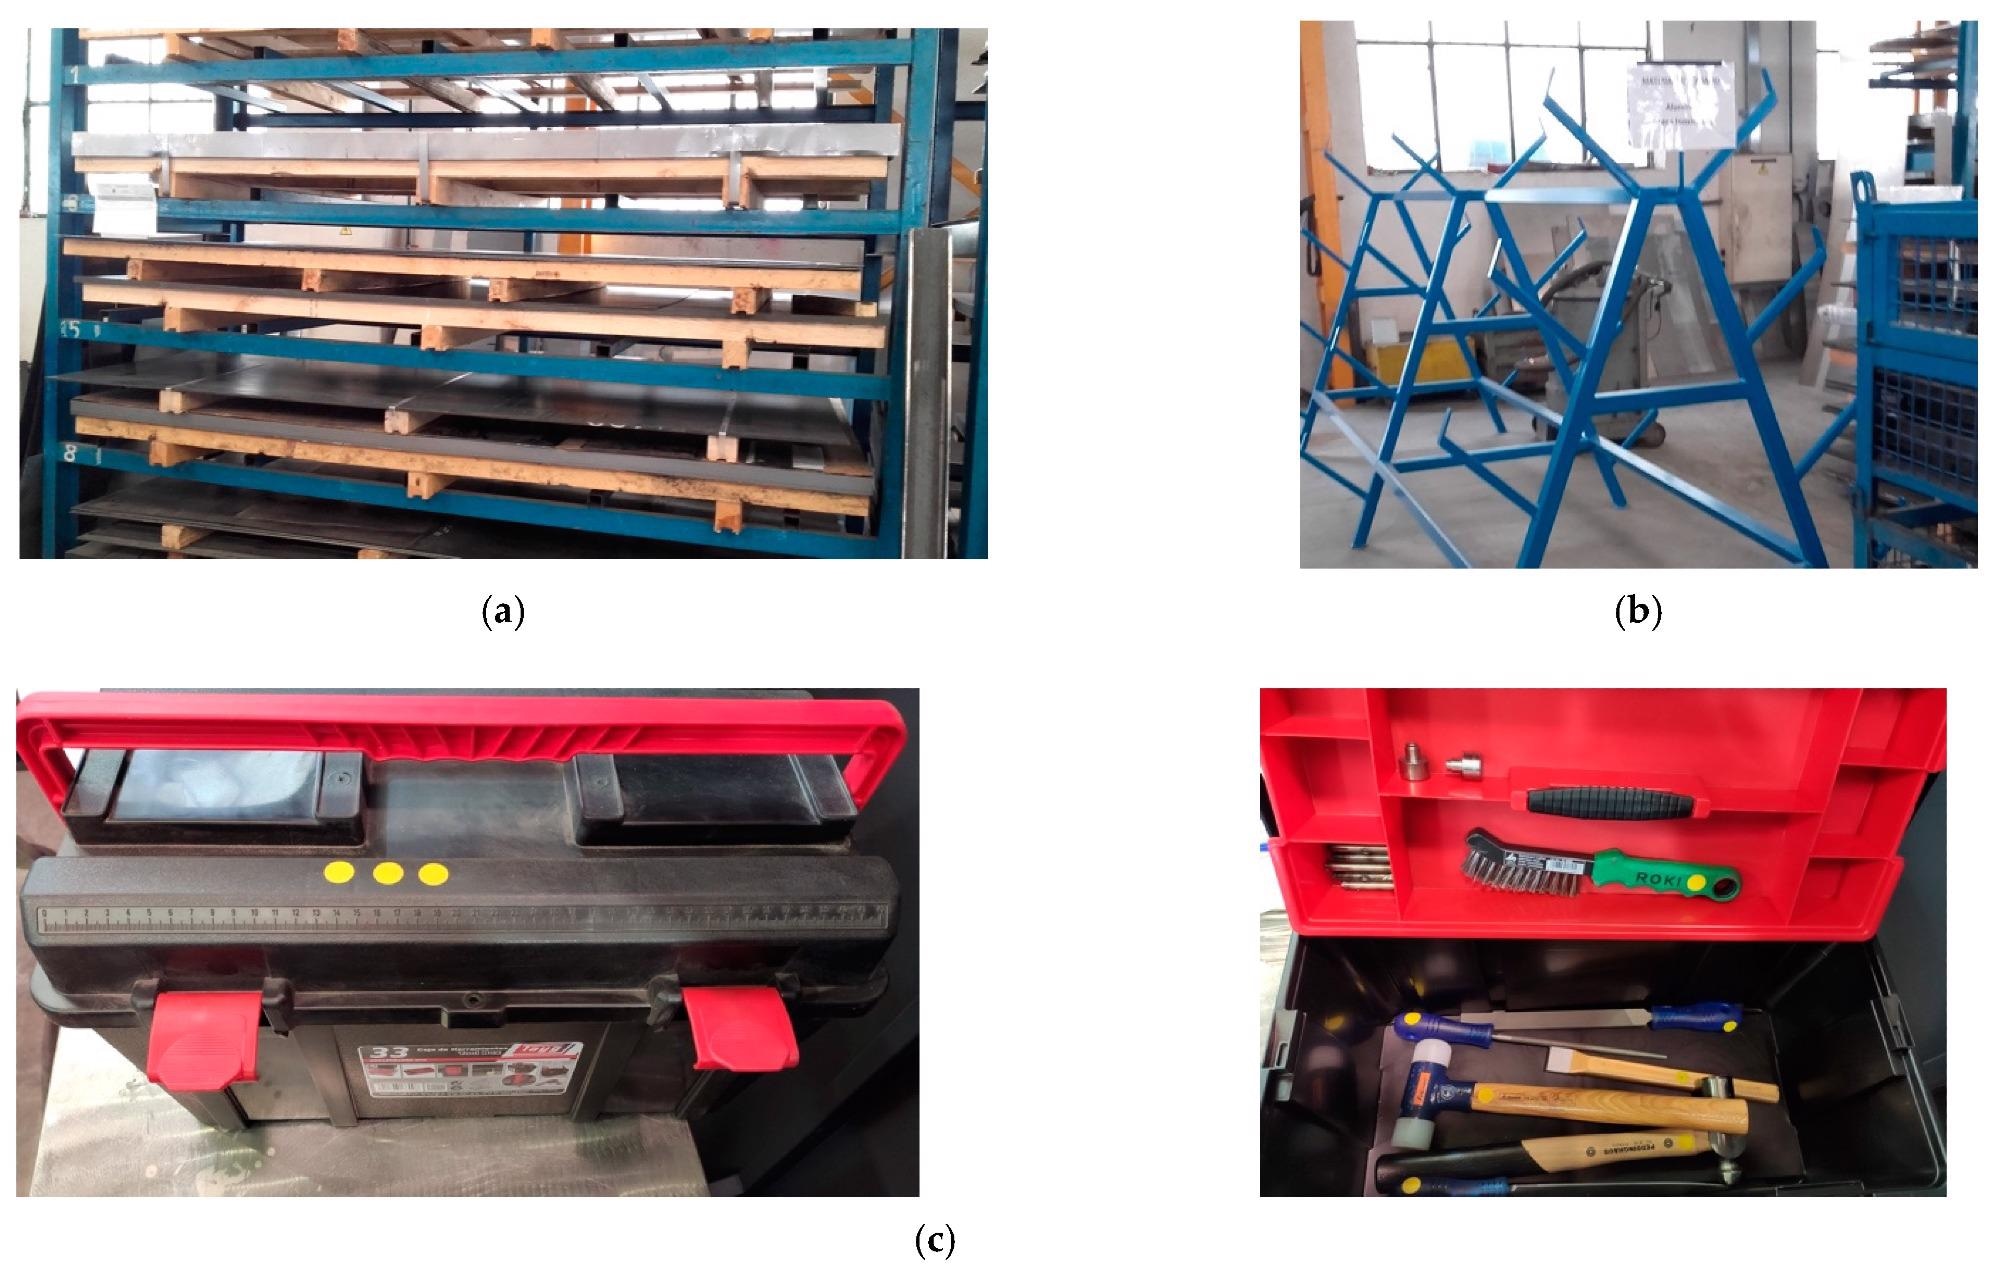 (a) Storage of metal sheets, (b) Structure for the storage of metal profiles for railway products, (c) Example of identifying hand tools for the manufacture of stainless-steel products with the colour yellow